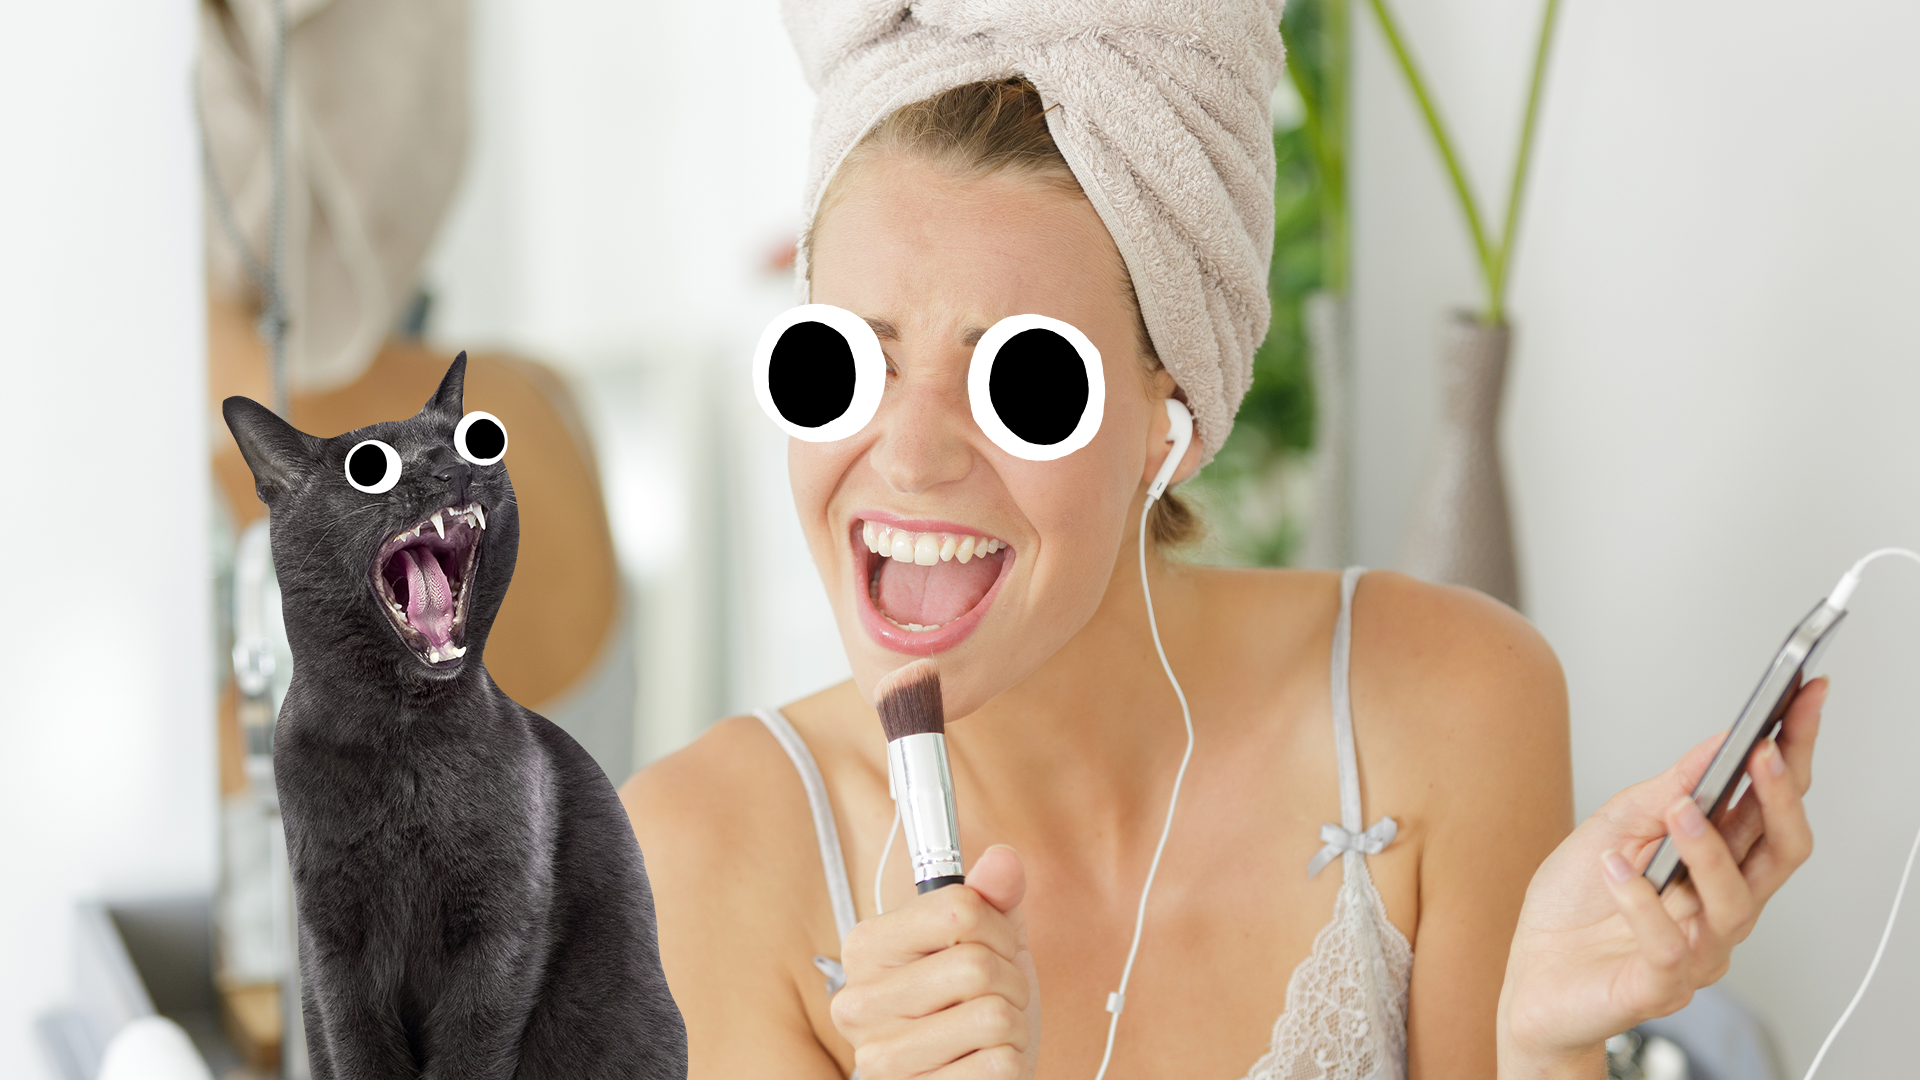 Woman singing into her makeup brush and screaming cat